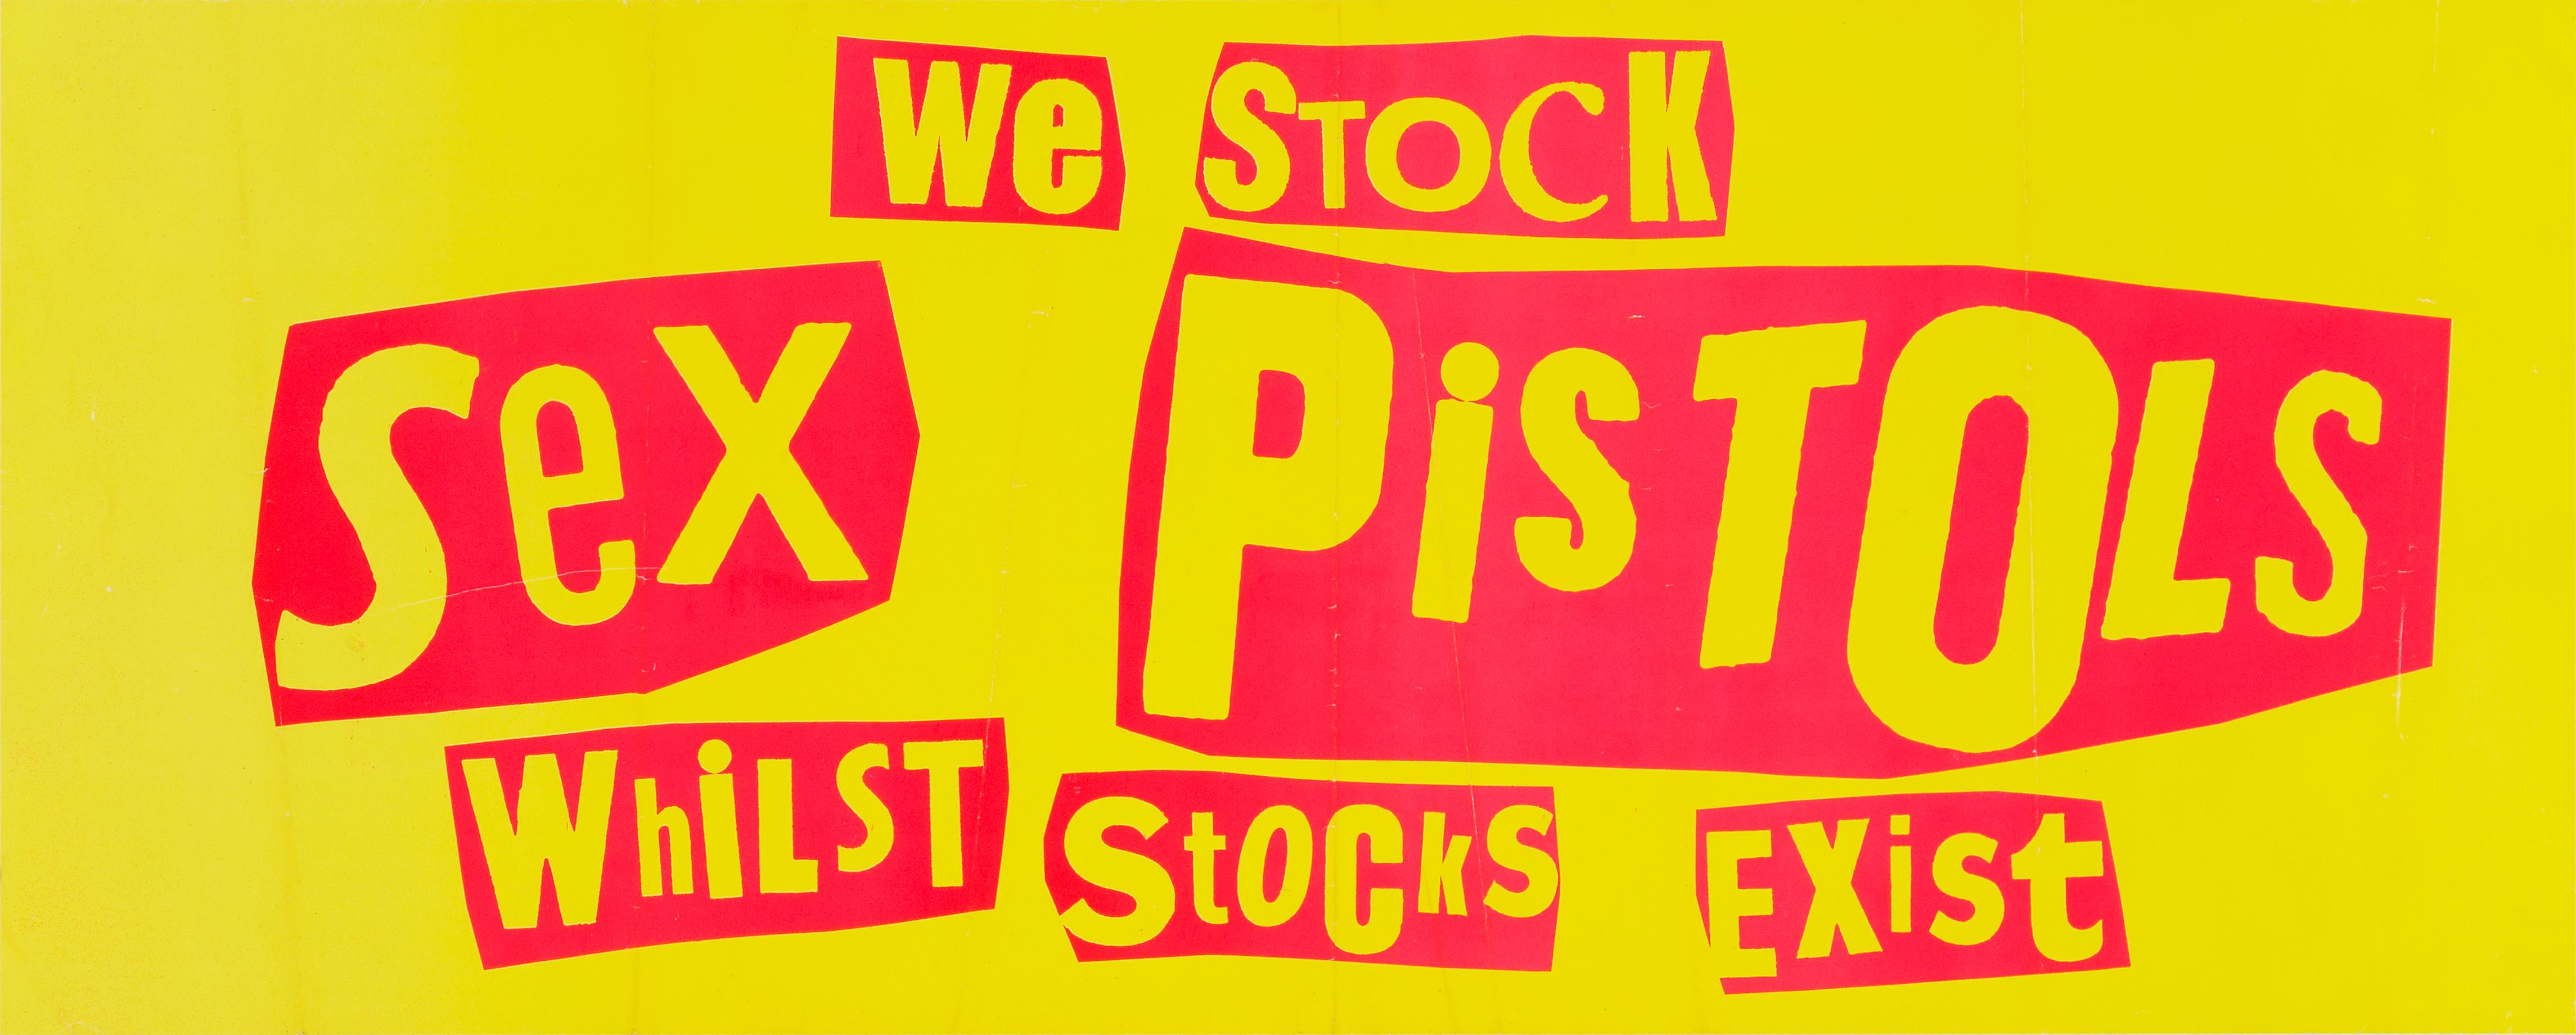 A promotional banner poster printed by Virgin Records to promote the October 1977 release of the Sex Pistols only studio album 